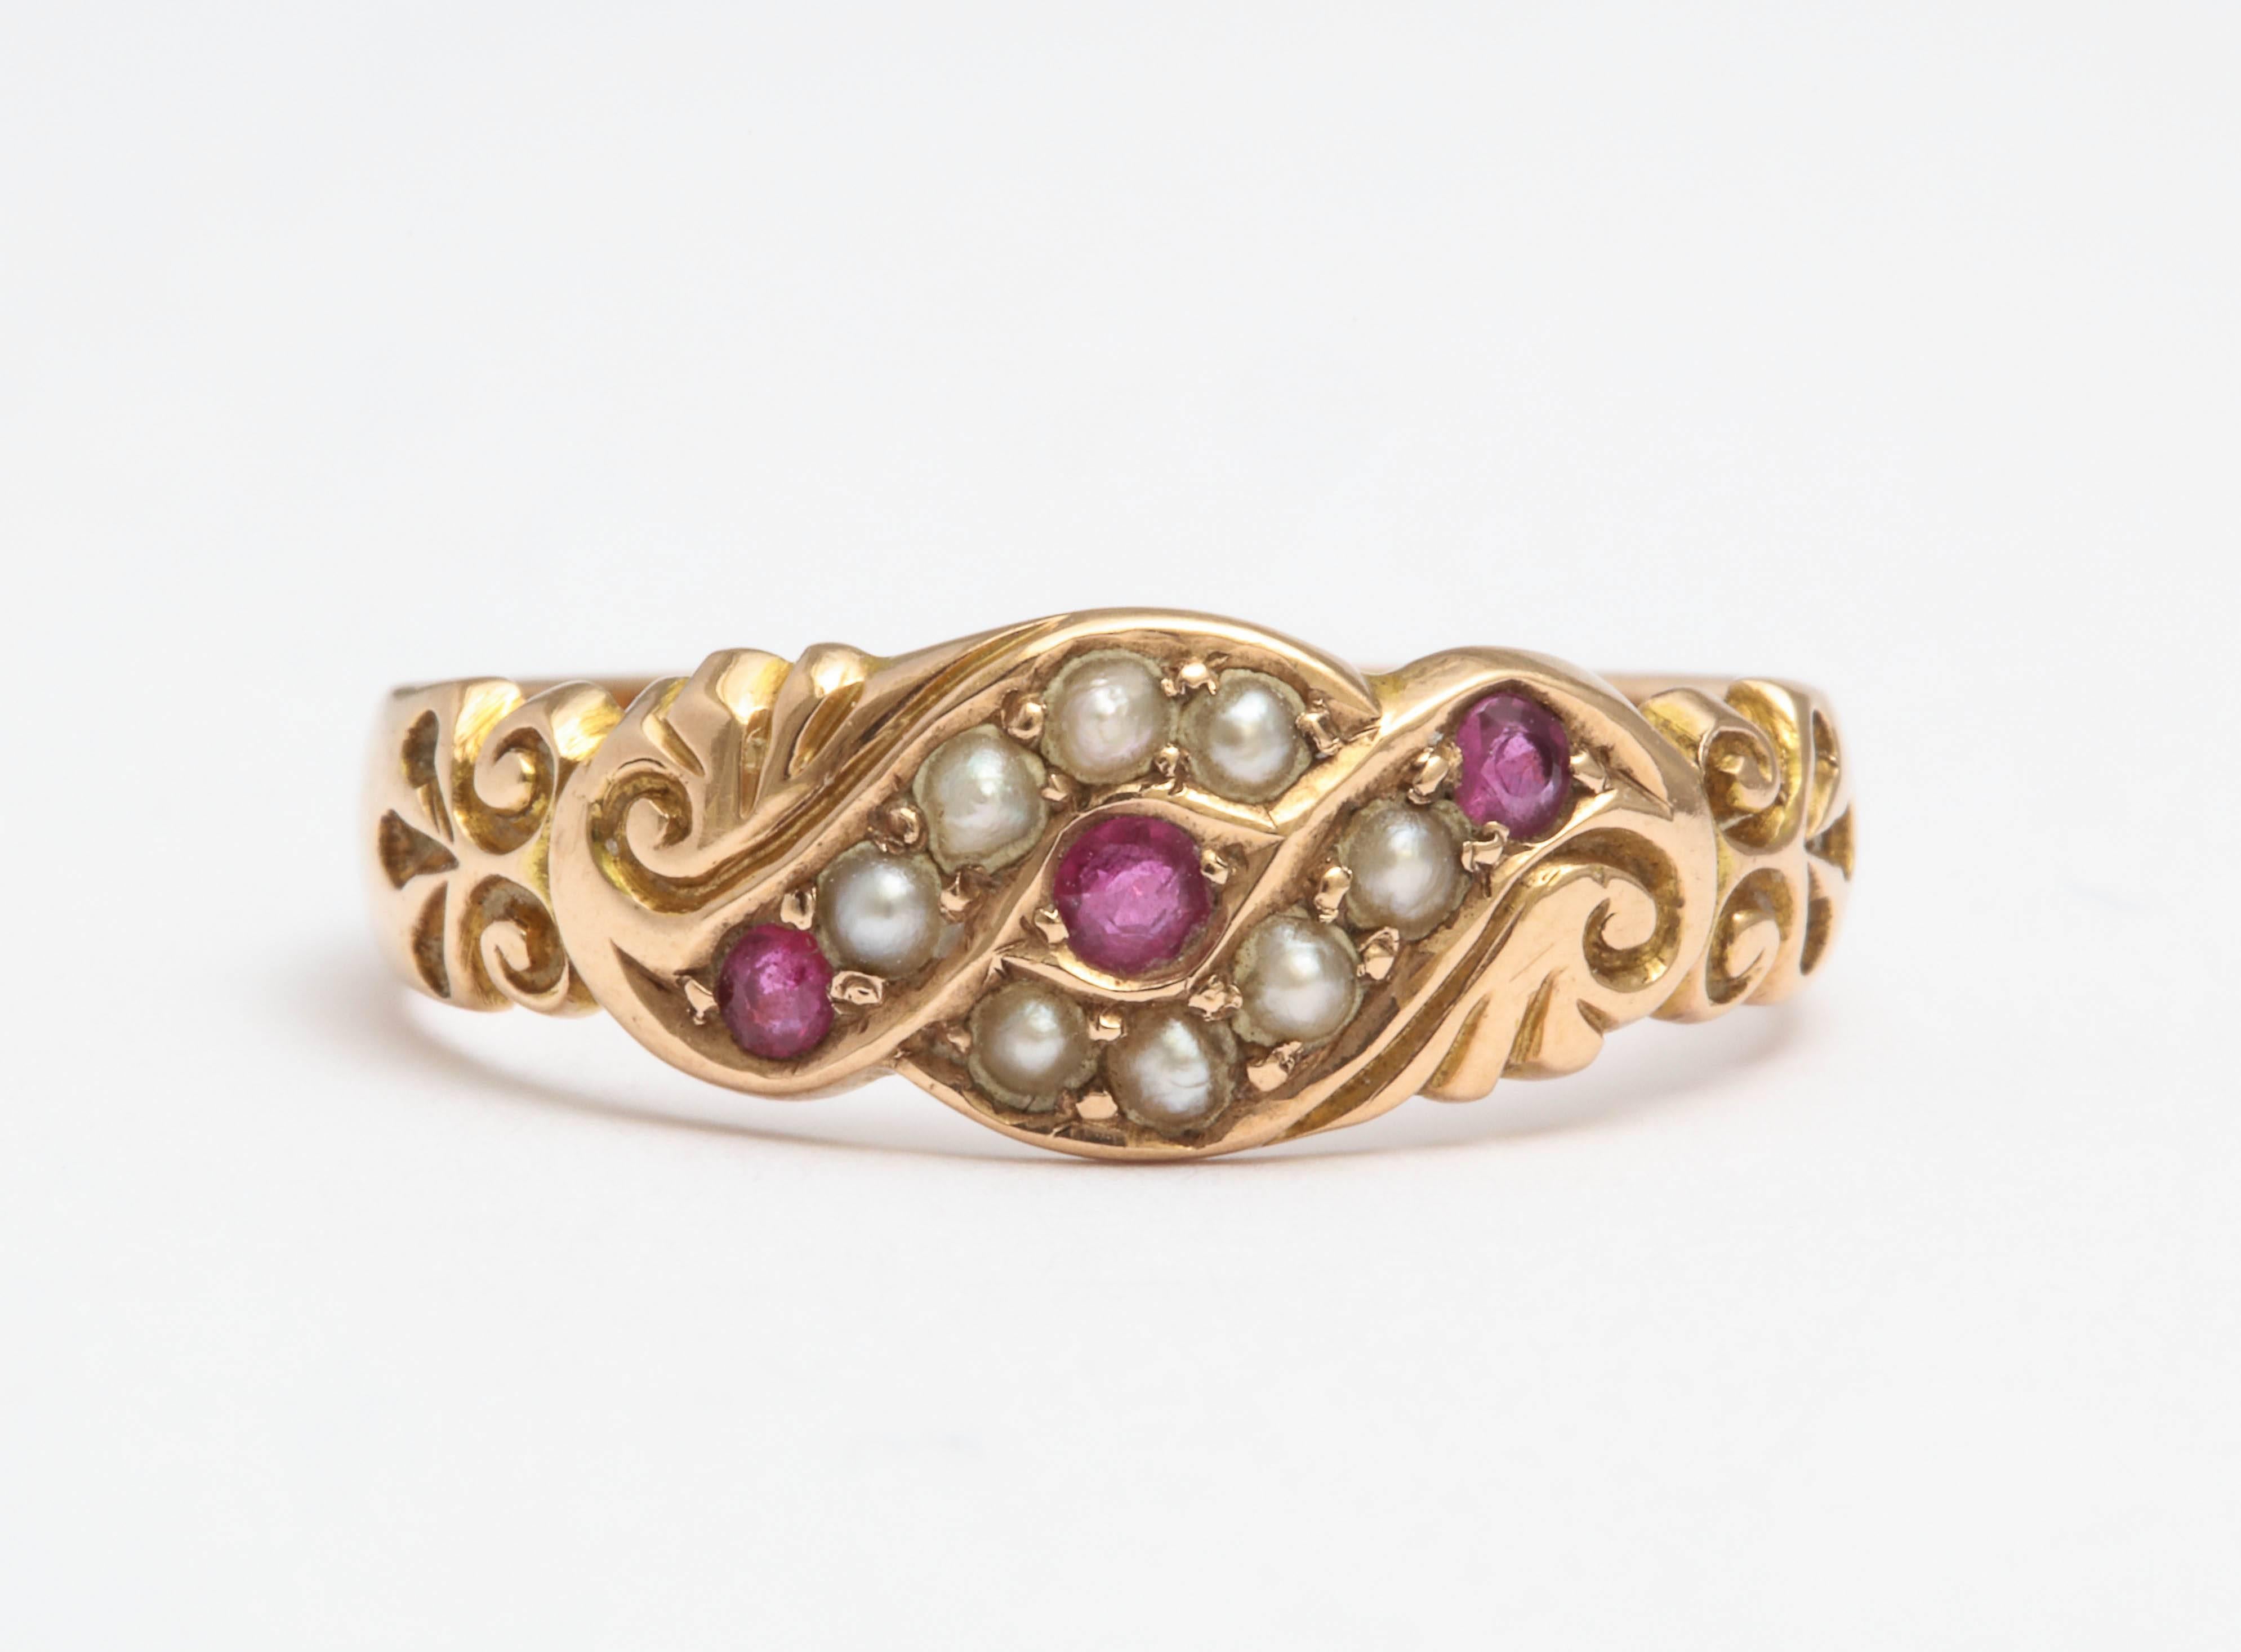 A tapered 15k rose gold ring, the top set with a three small rubies and eight seed pearls, in a beautiful scrolling mount. 

size 7 1/4.   Width of band: 6.5 mm top; 3.2 mm bottom 

Birmingham, date letter k for 2010, 15, 625. 

